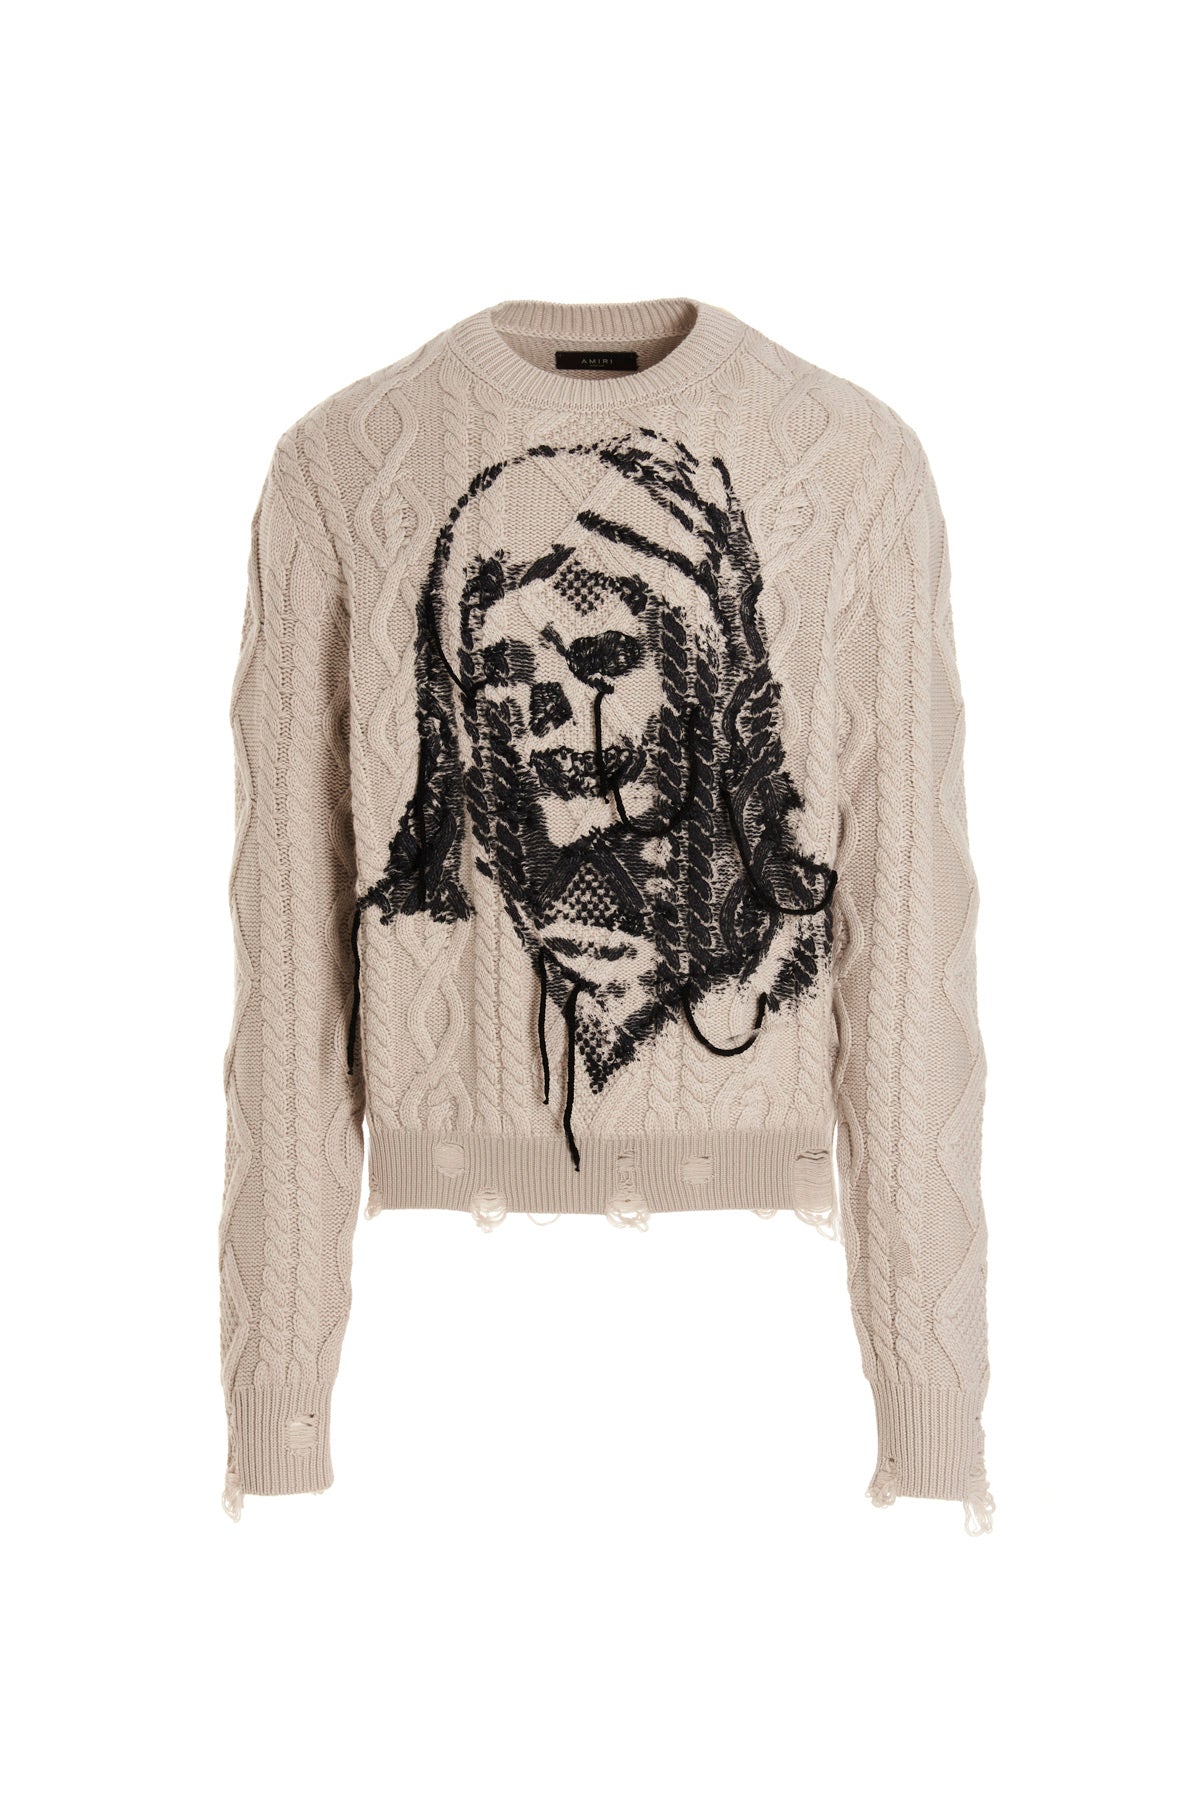 AMIRI 'WES LANG CABLE REAPER’ SWEATER